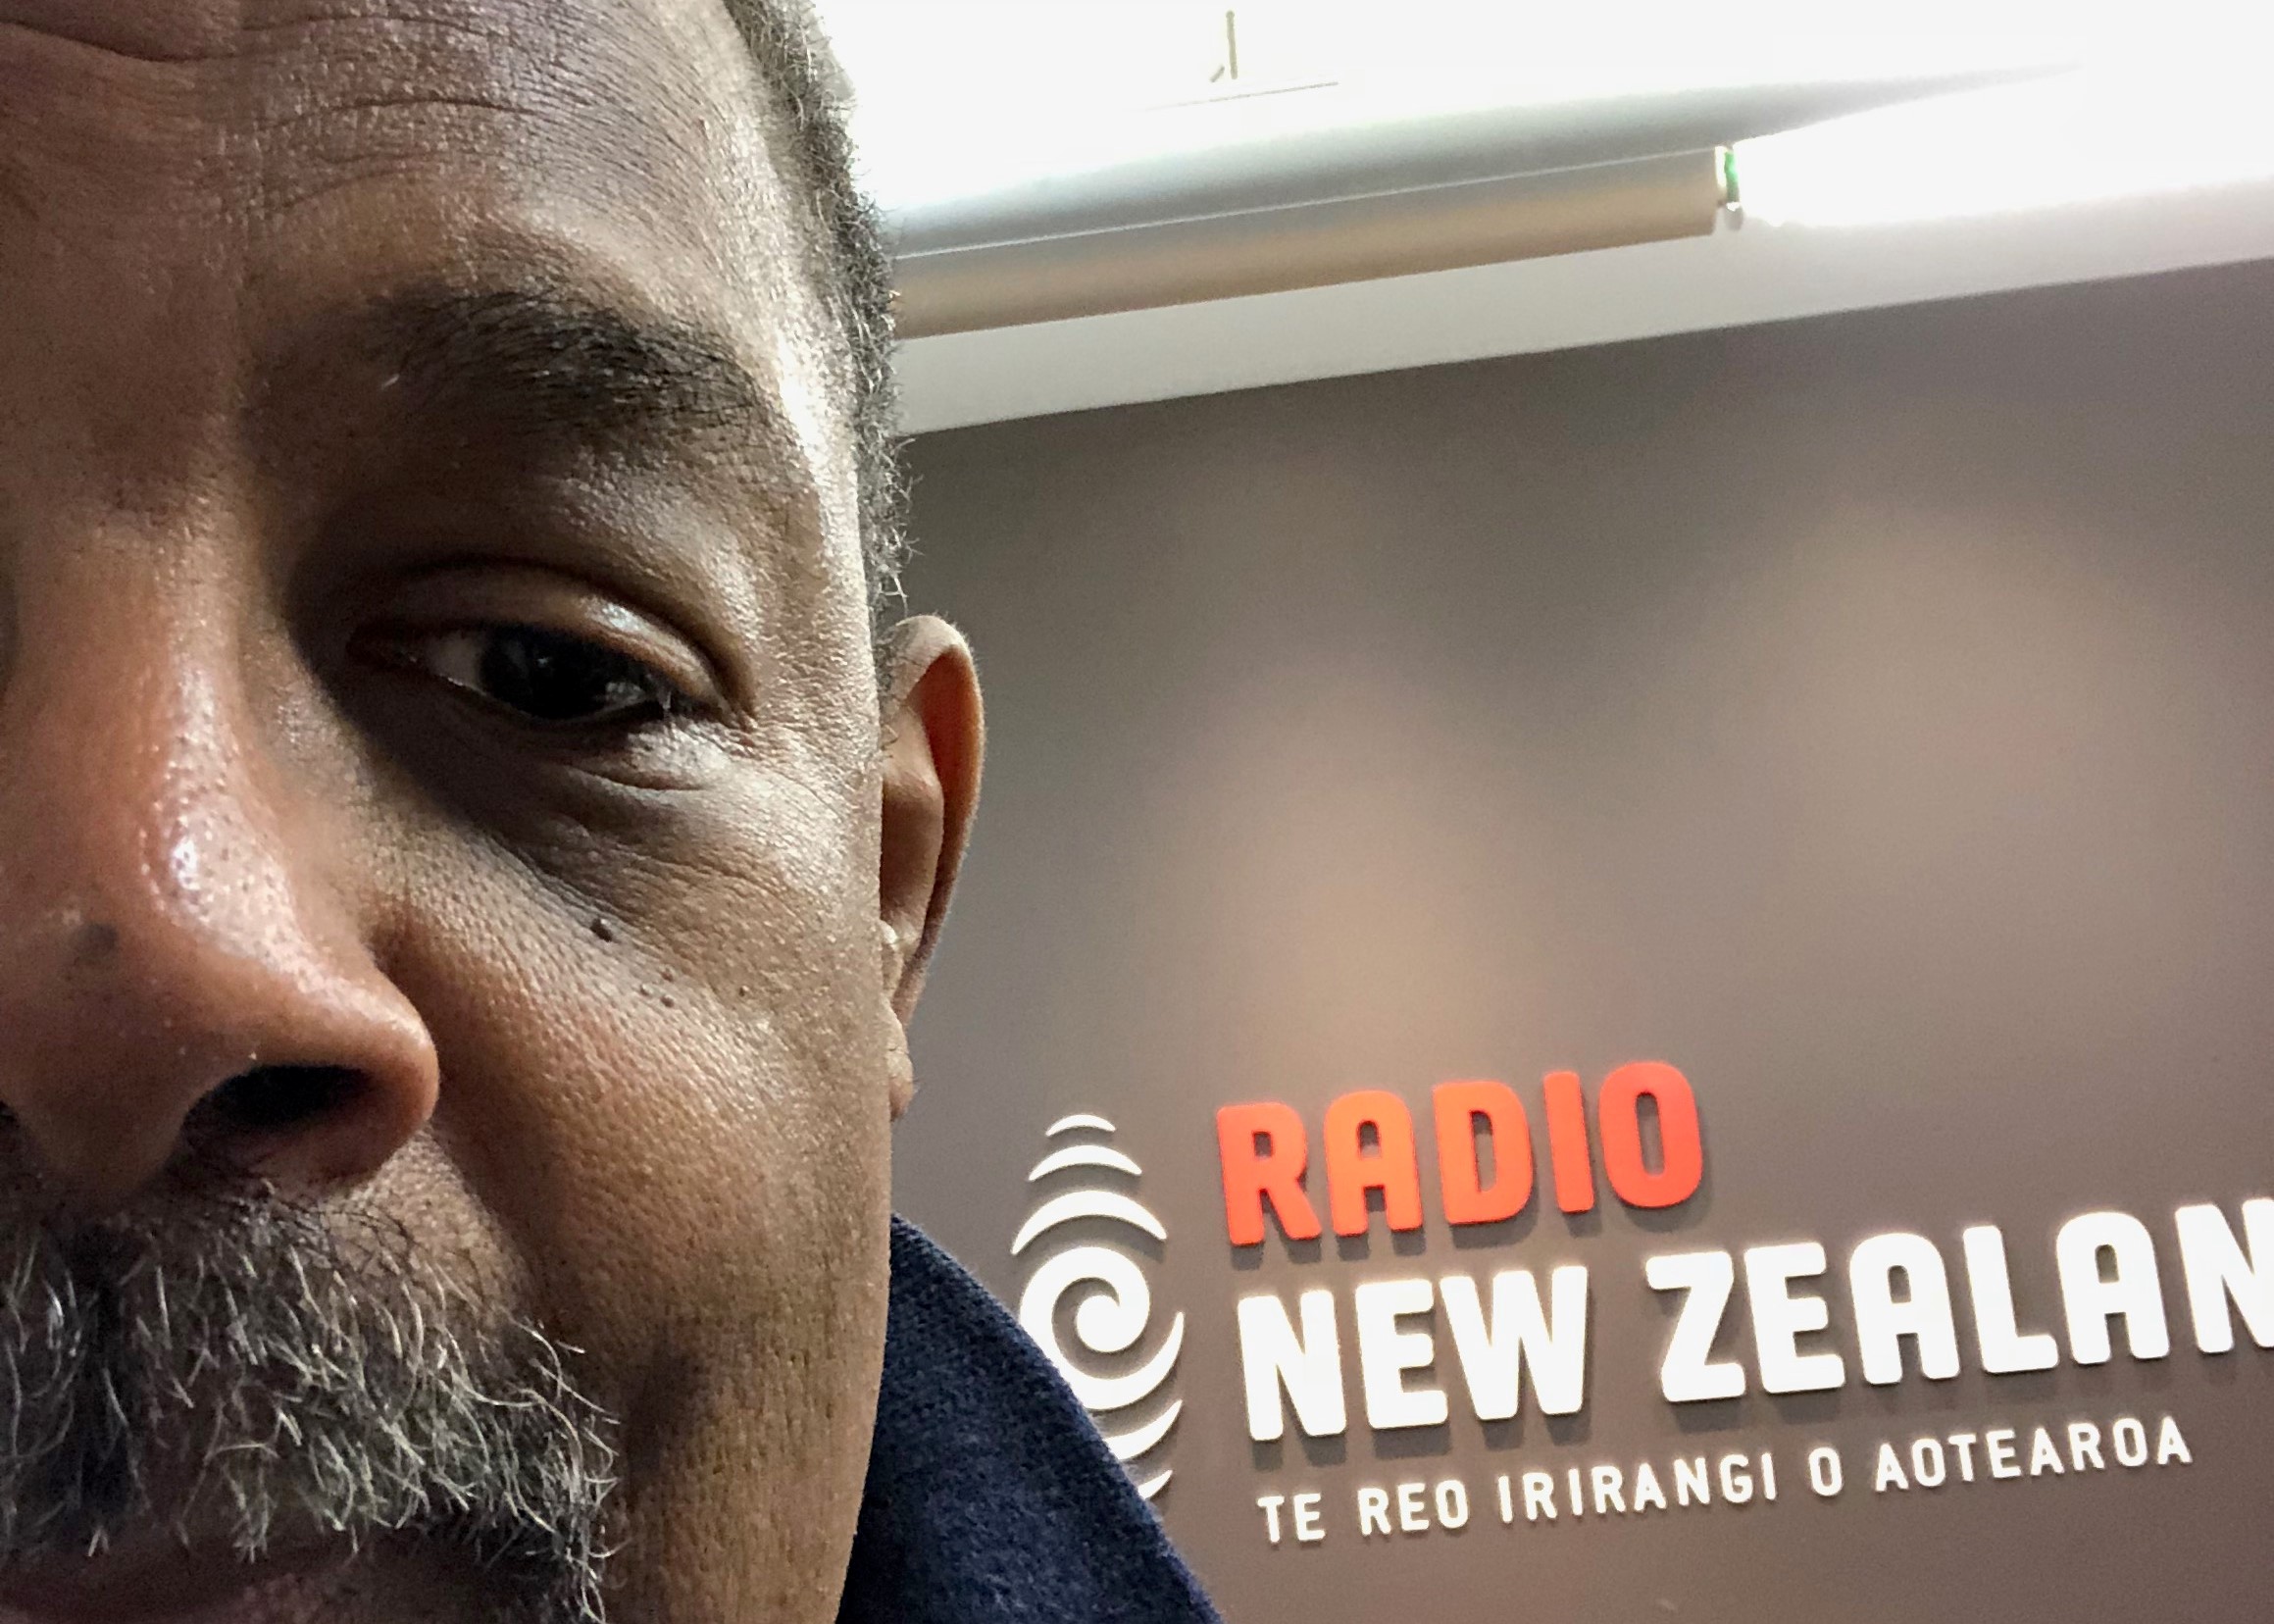 Radio New Zealand, 2018, early morning interview